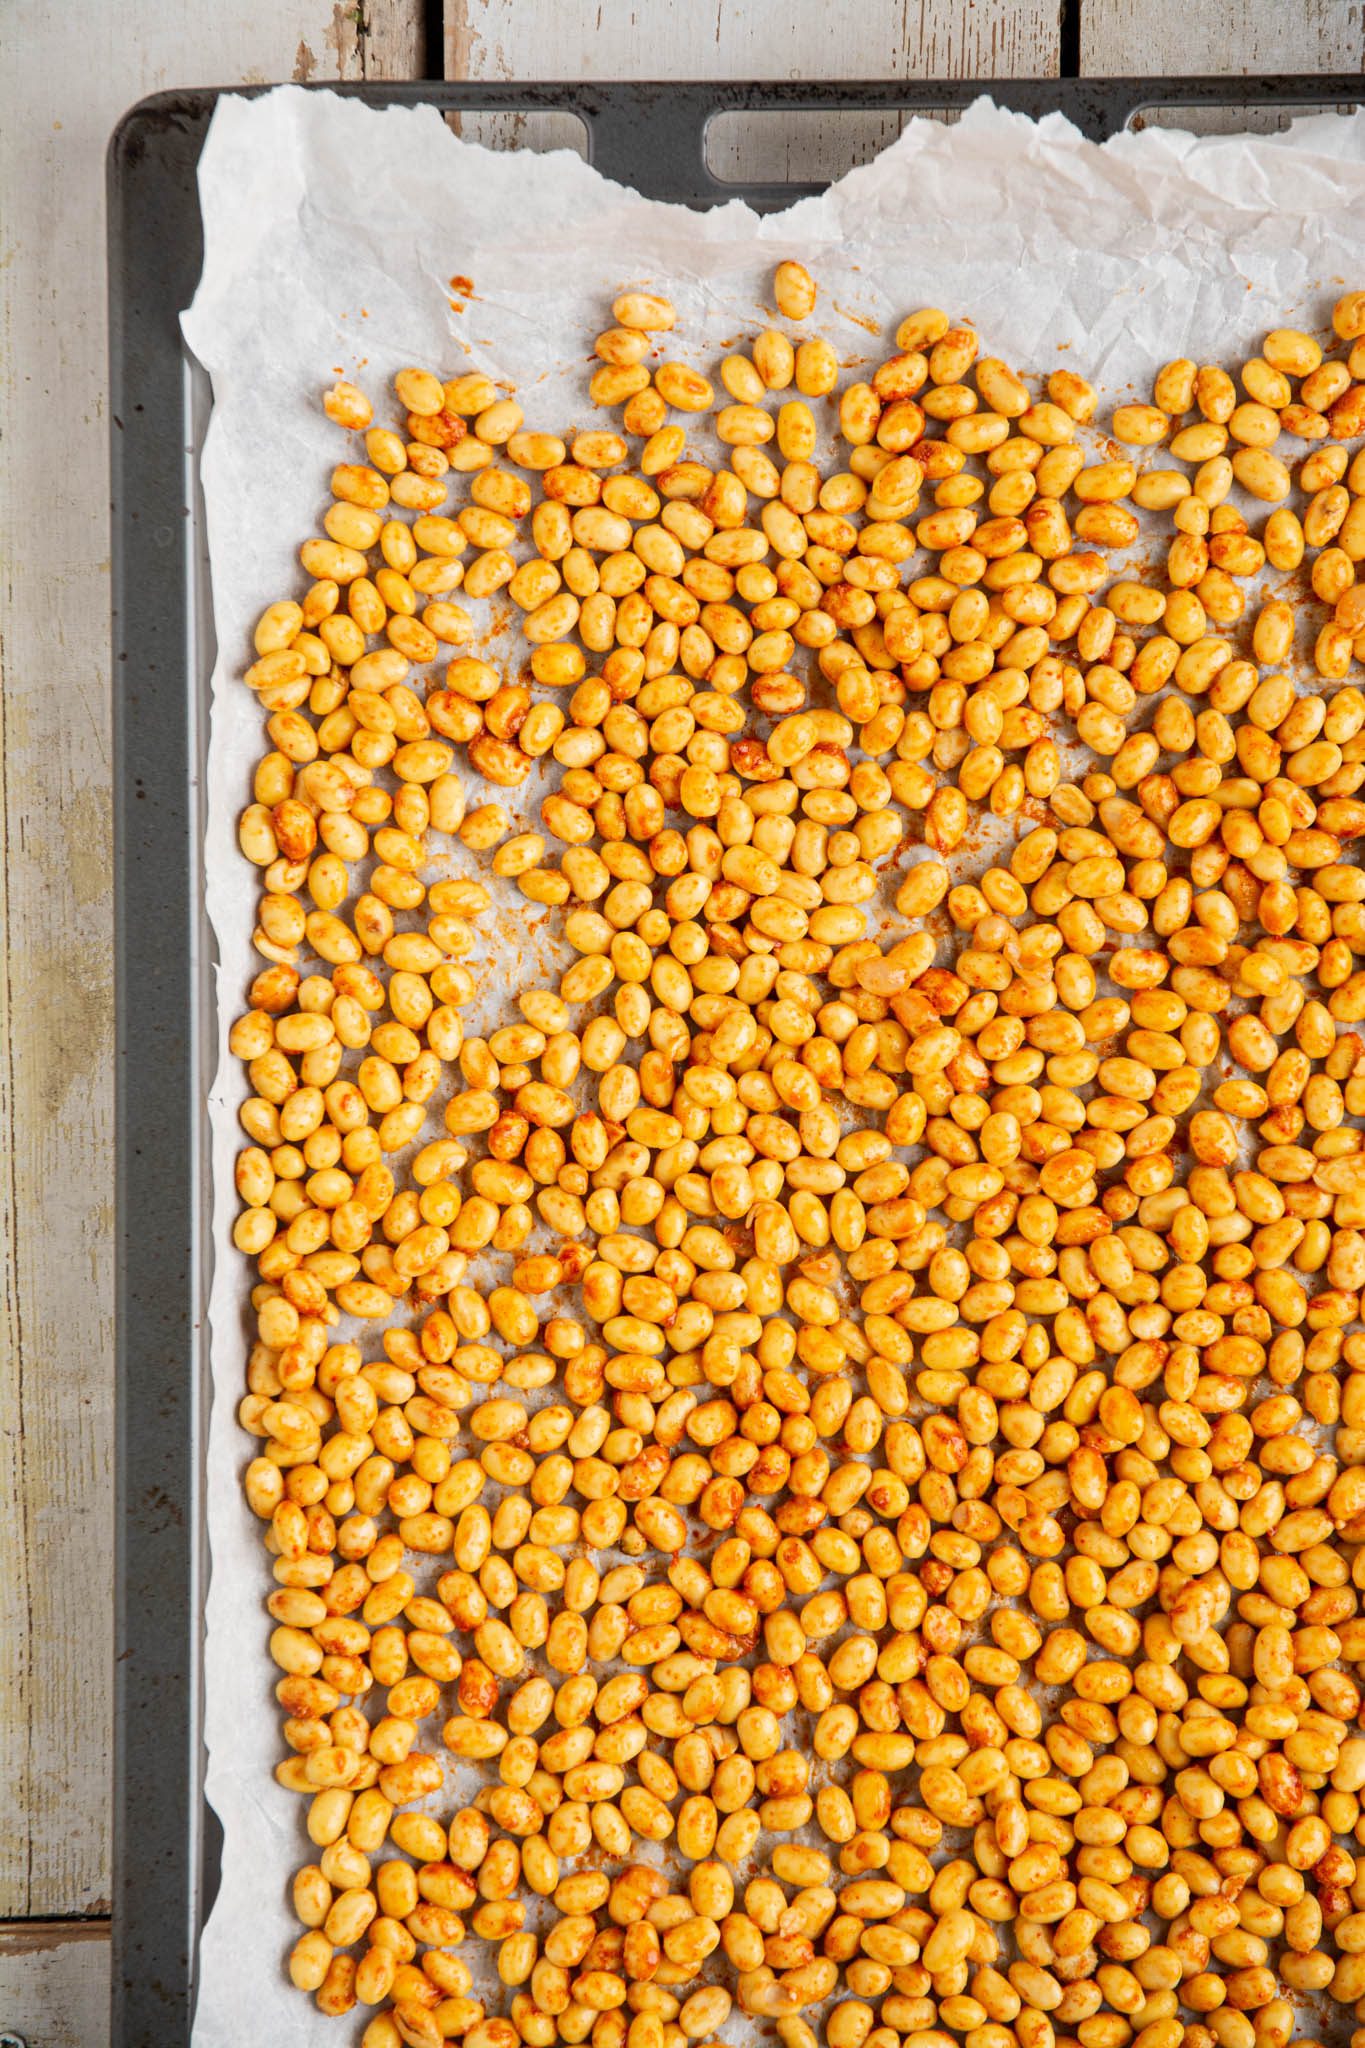 Learn how to make dry roasted soybeans in the oven without oil for a tasty low glycemic healthy snack.